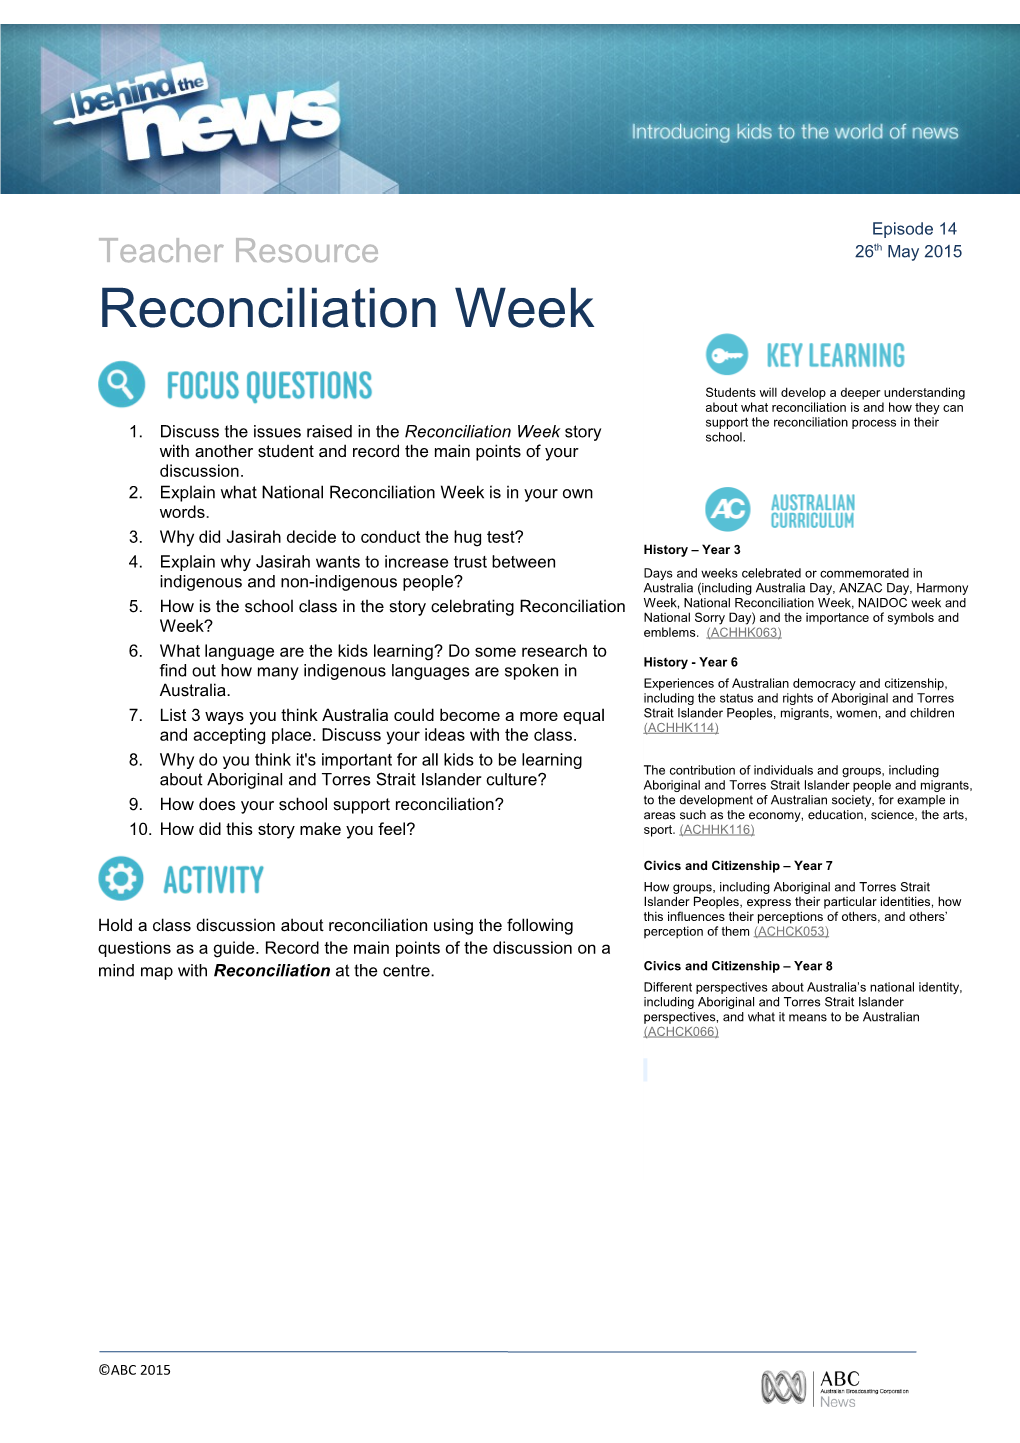 2. Explain What National Reconciliation Week Is in Your Own Words